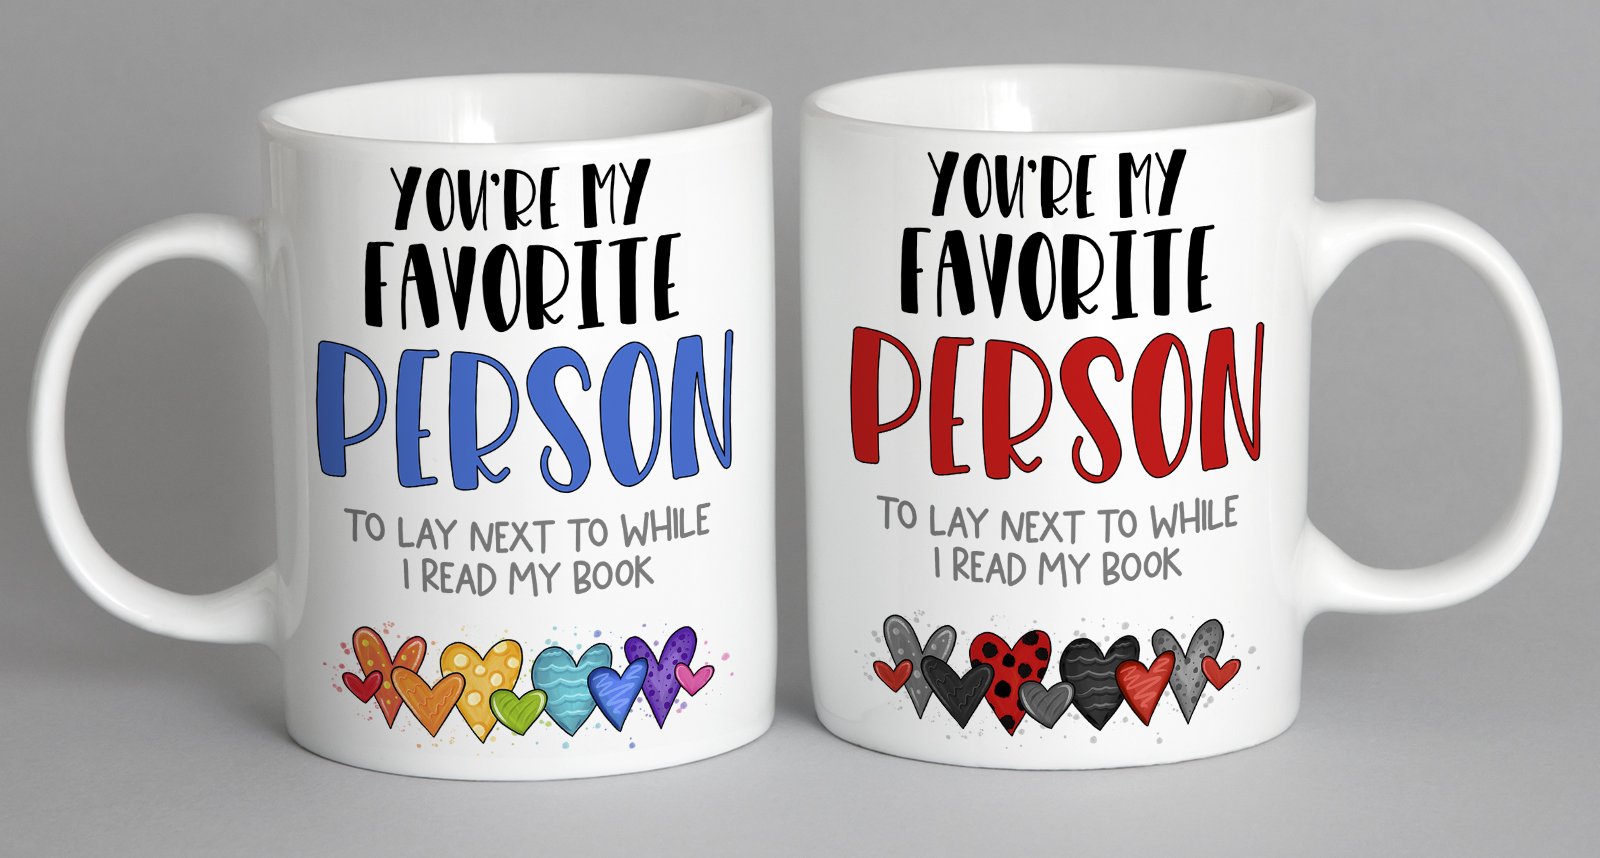 Youre My Favorite Person To Lay Next While I Read Book (Black/red Version) Mug Coffee